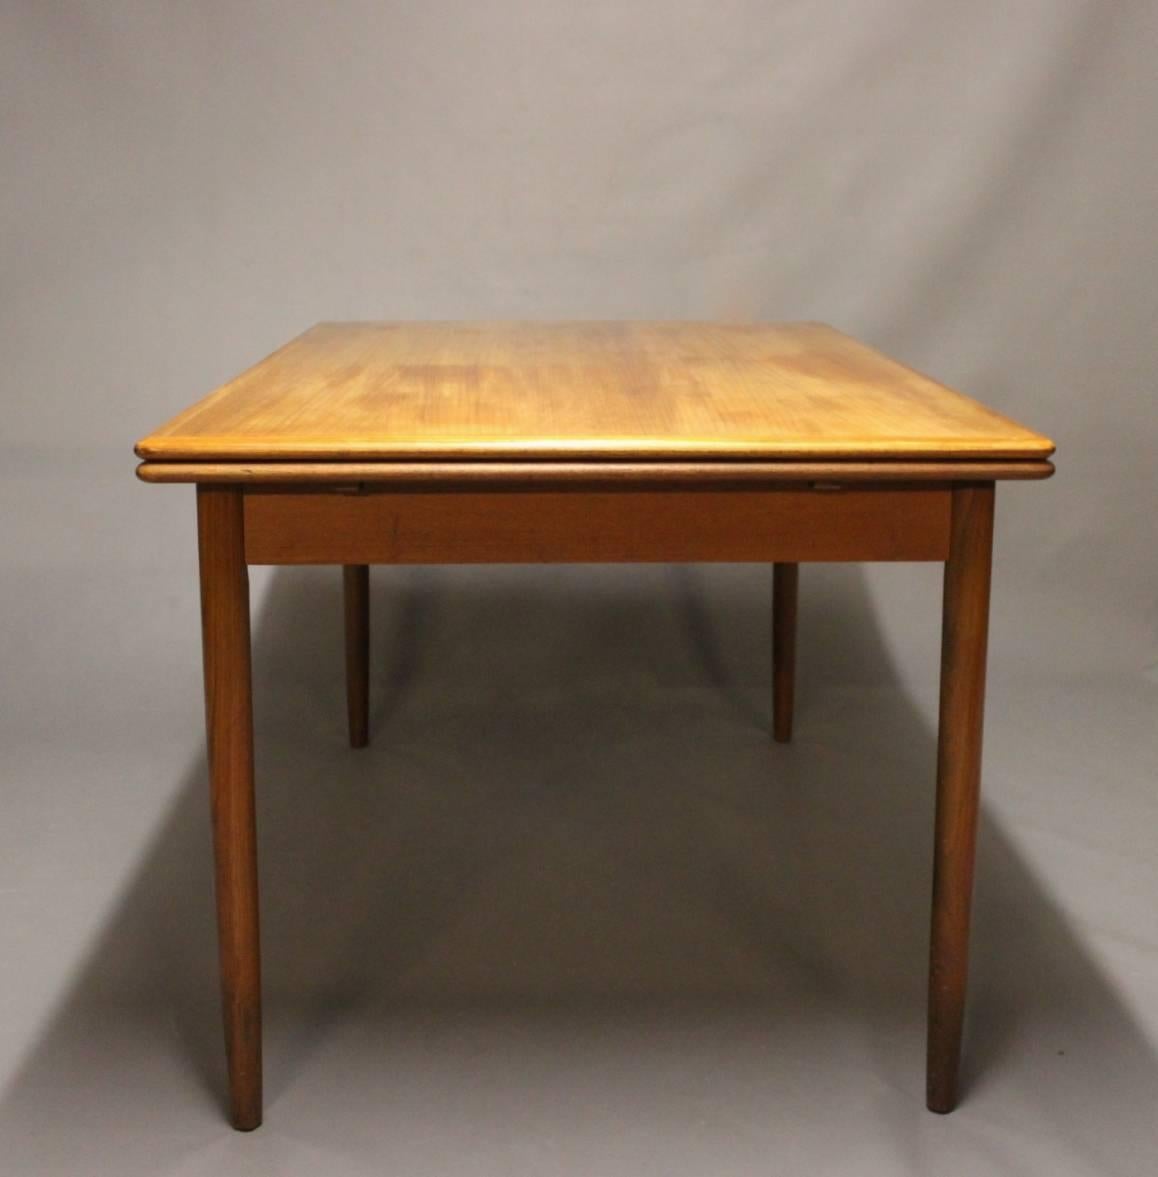 Dining table in teak with two extension leaves and in great vintage condition. The table is of Danish design from the 1960s.